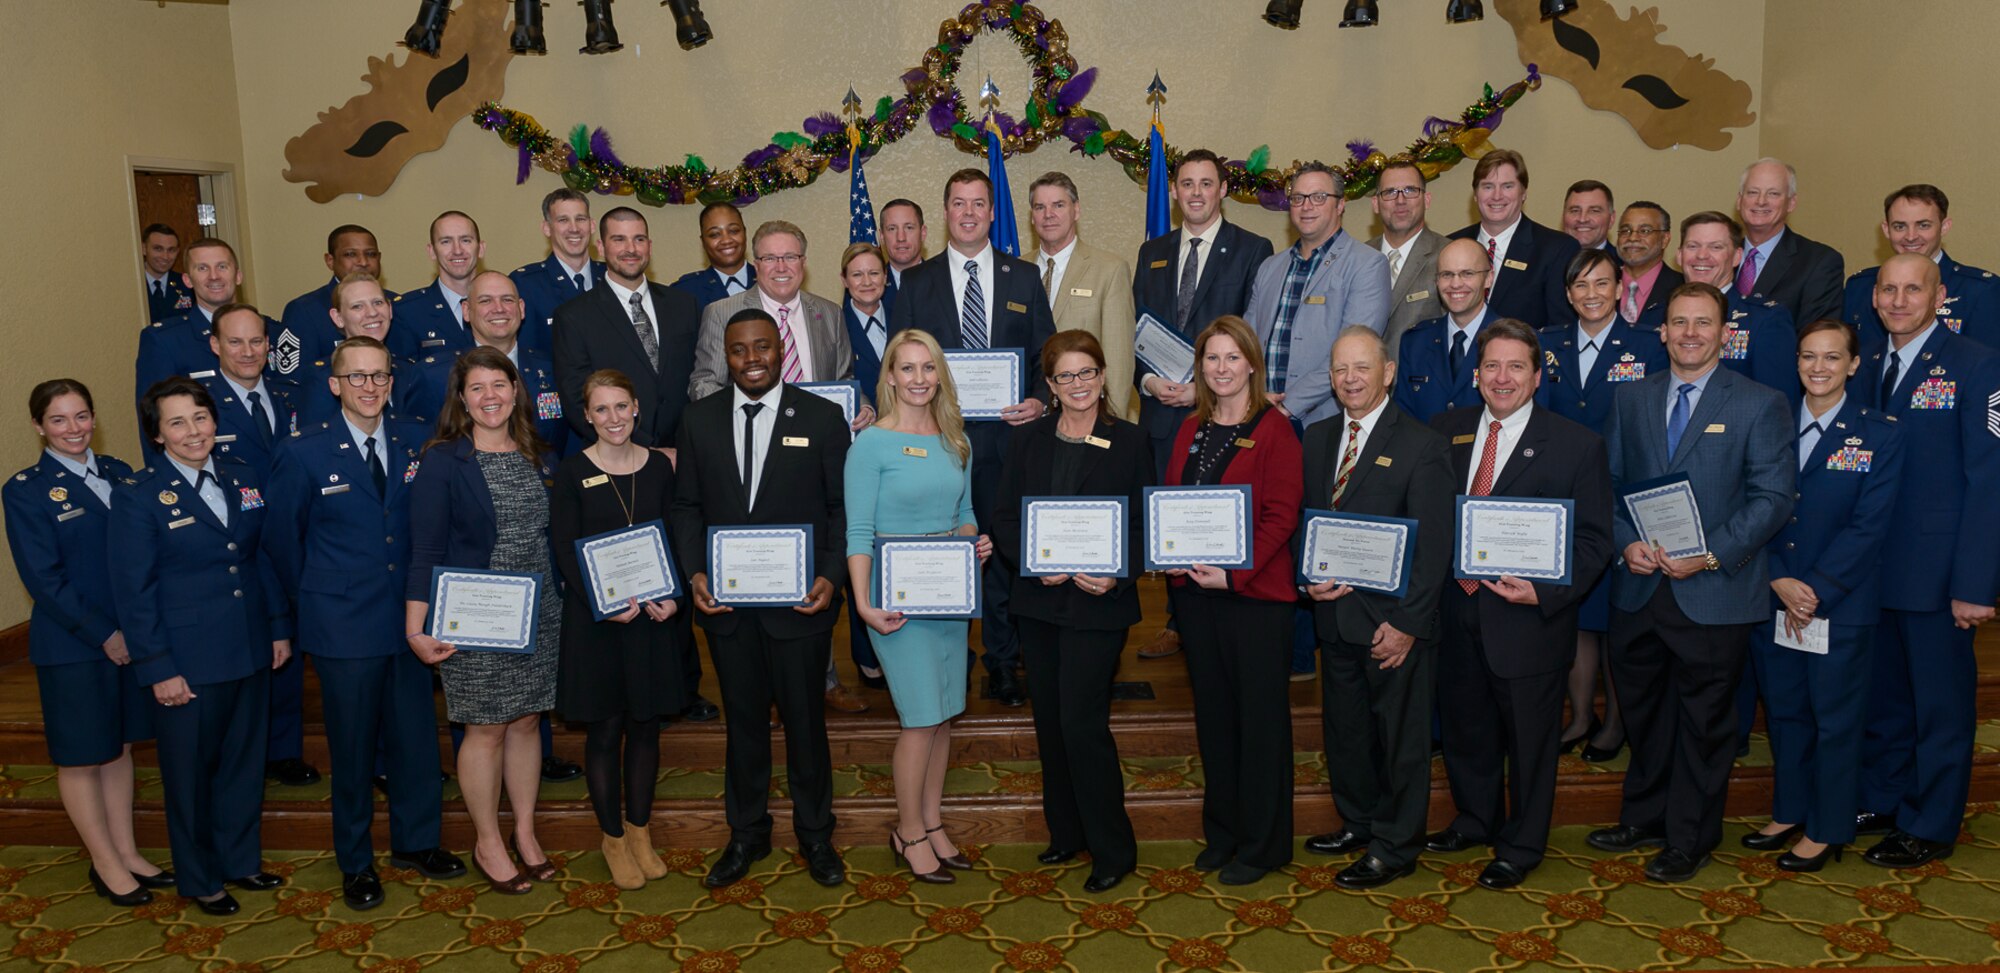 Keesler leadership pose for a group photo with the newly inducted honorary commanders during the 2018 Honorary Commanders Induction Ceremony at the Bay Breeze Event Center Jan. 26, 2018, on Keesler Air Force Base, Mississippi. The event recognized the newest members of Keesler’s honorary commanders program, which is a partnership between base leadership and local civic leaders to promote strong ties between military and civilian leaders. (U.S. Air Force photo by André Askew)